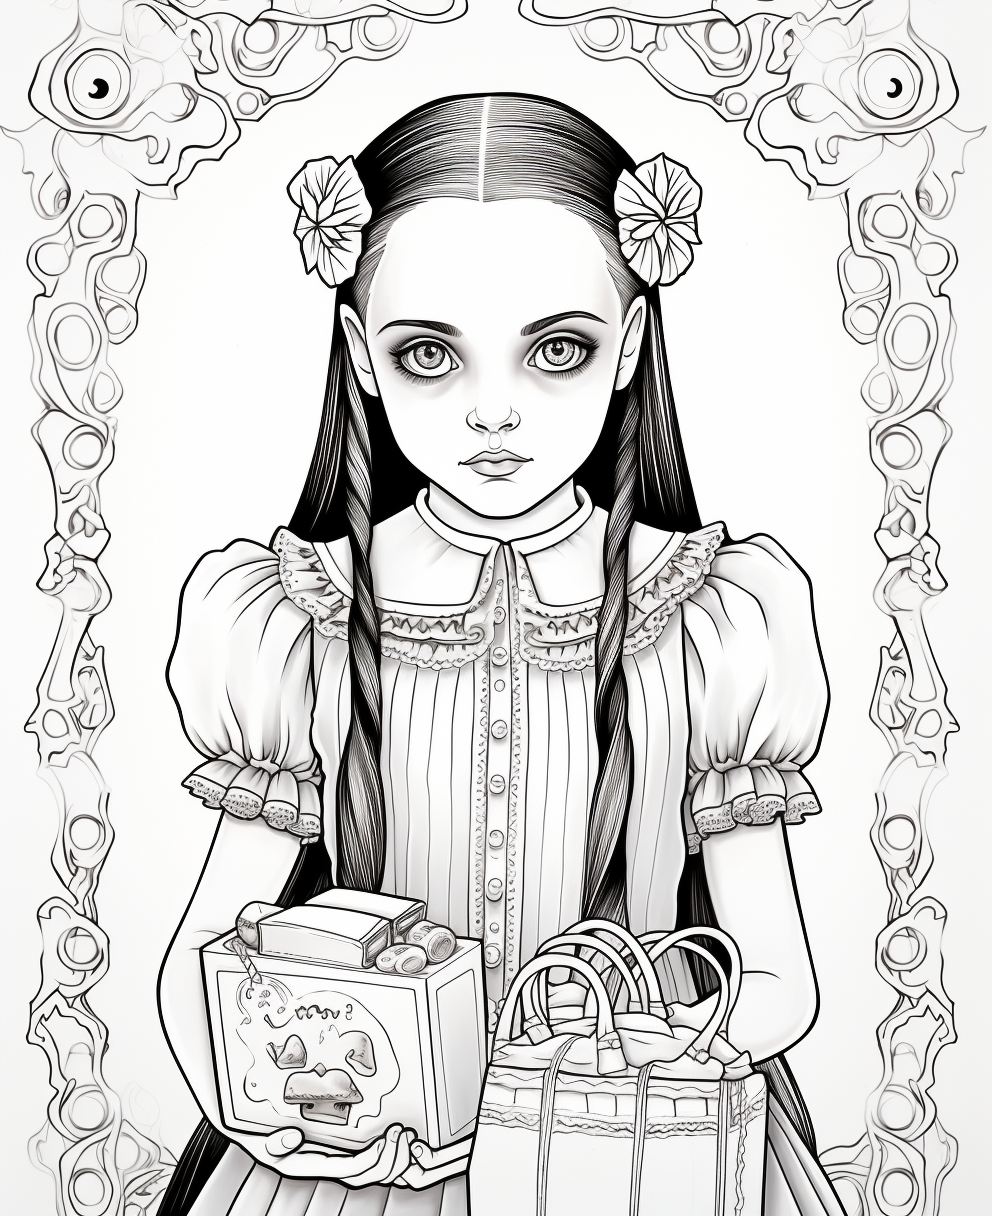 Halloween Special: Wednesday Addams | Sweet Coloring Delight! - Free ...